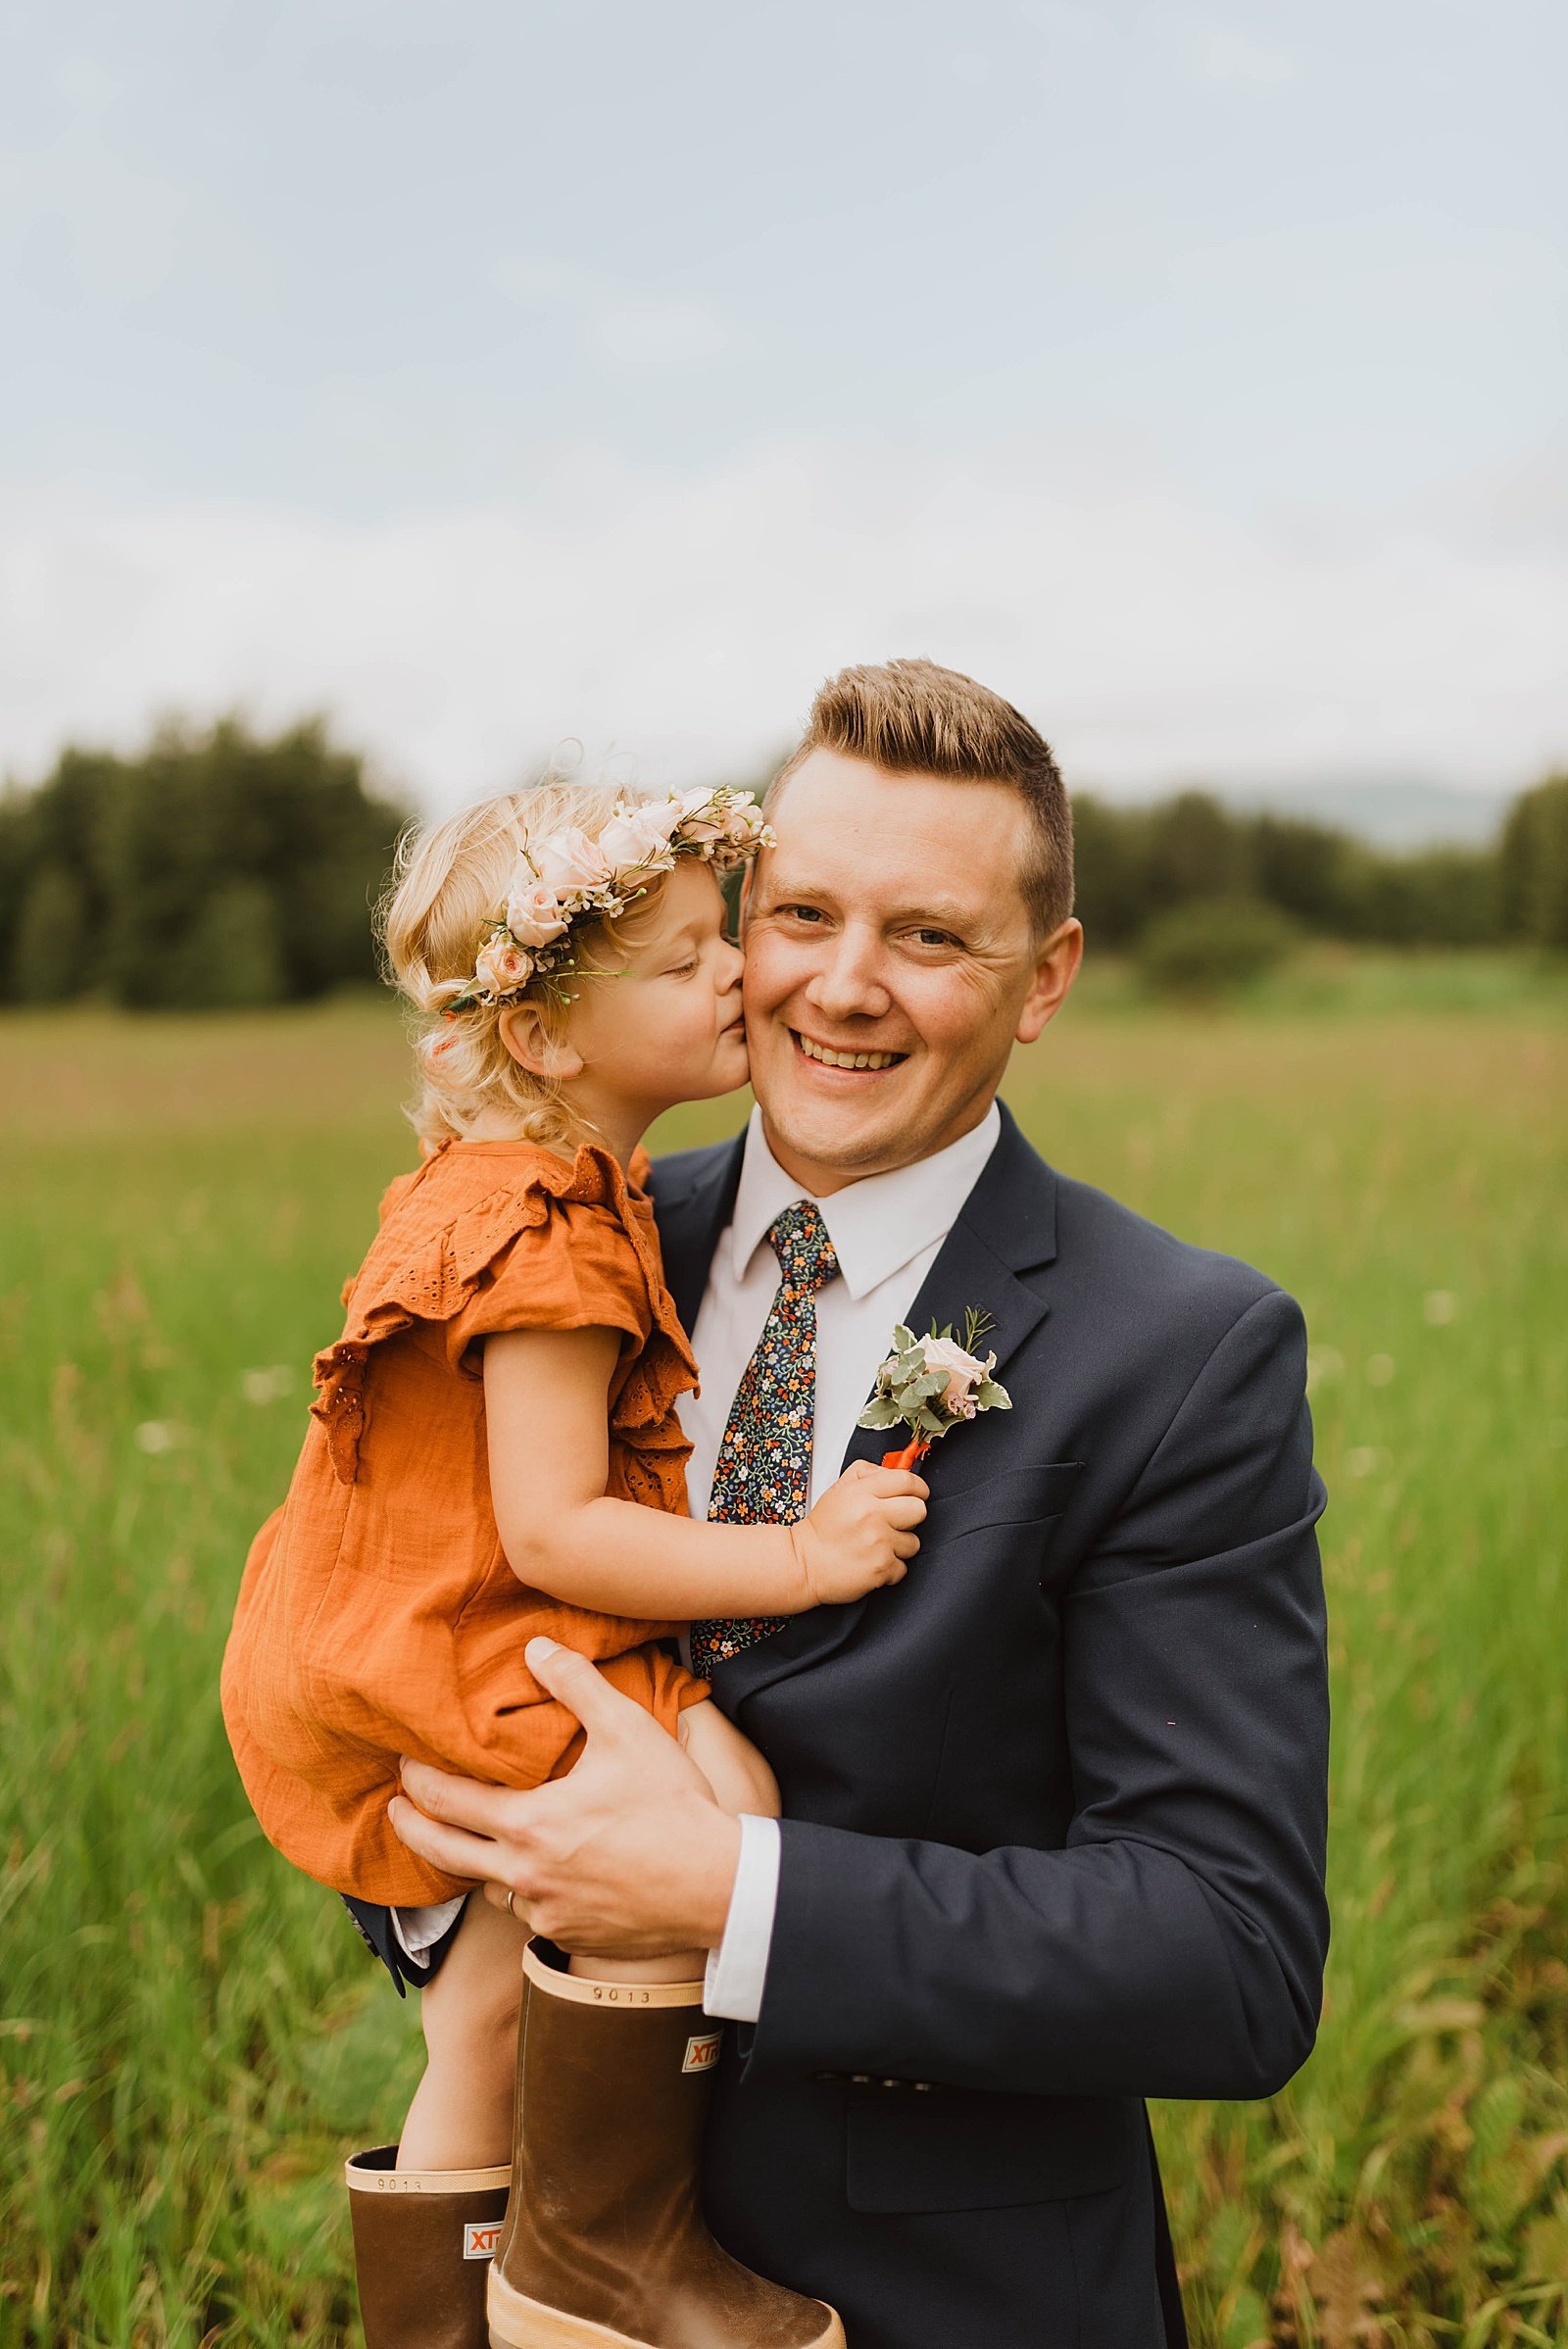  Groom getting kiss from his small daughter in an orange dress.  